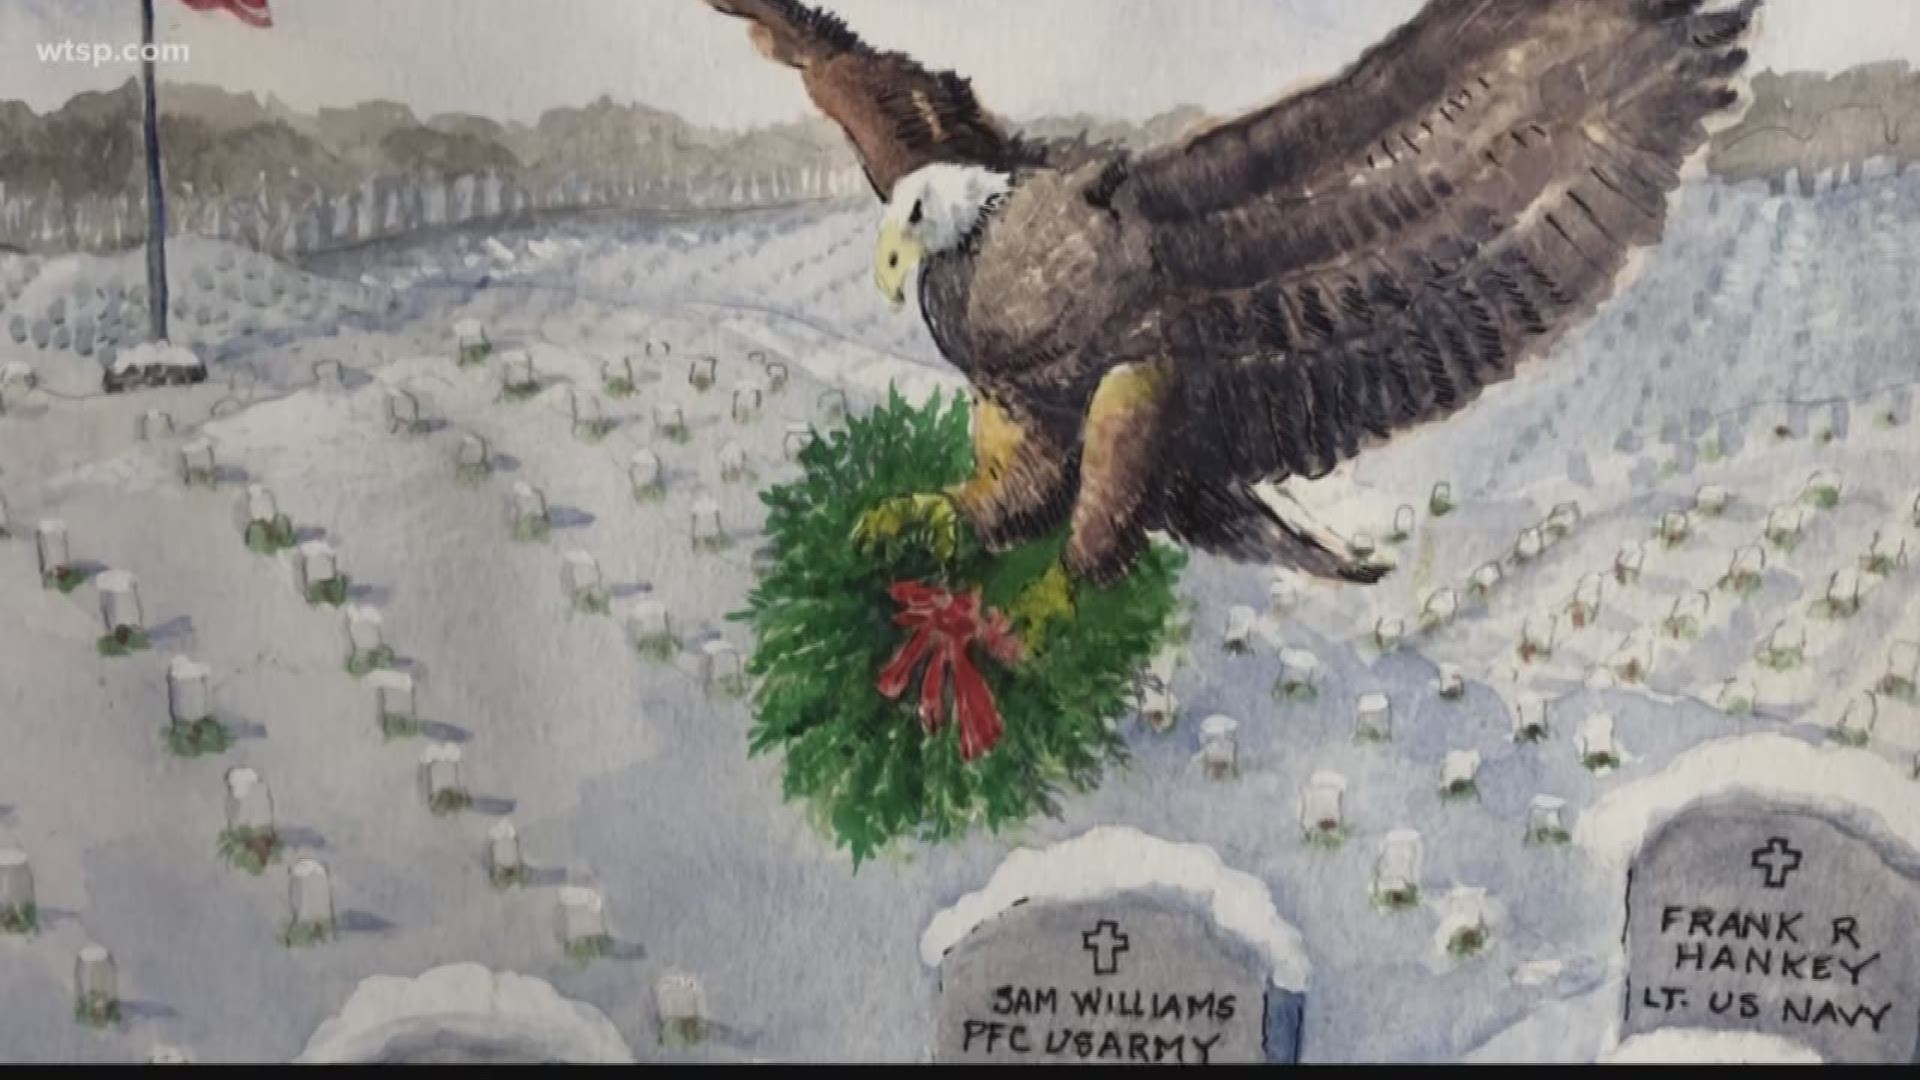 Craig Gross paints patriotic scenes in honor of Cpl. Frank R. Gross, who was killed in action July 16, 2011, in Afghanistan. They also led him to meet the president.
https://on.wtsp.com/2P5ox9P